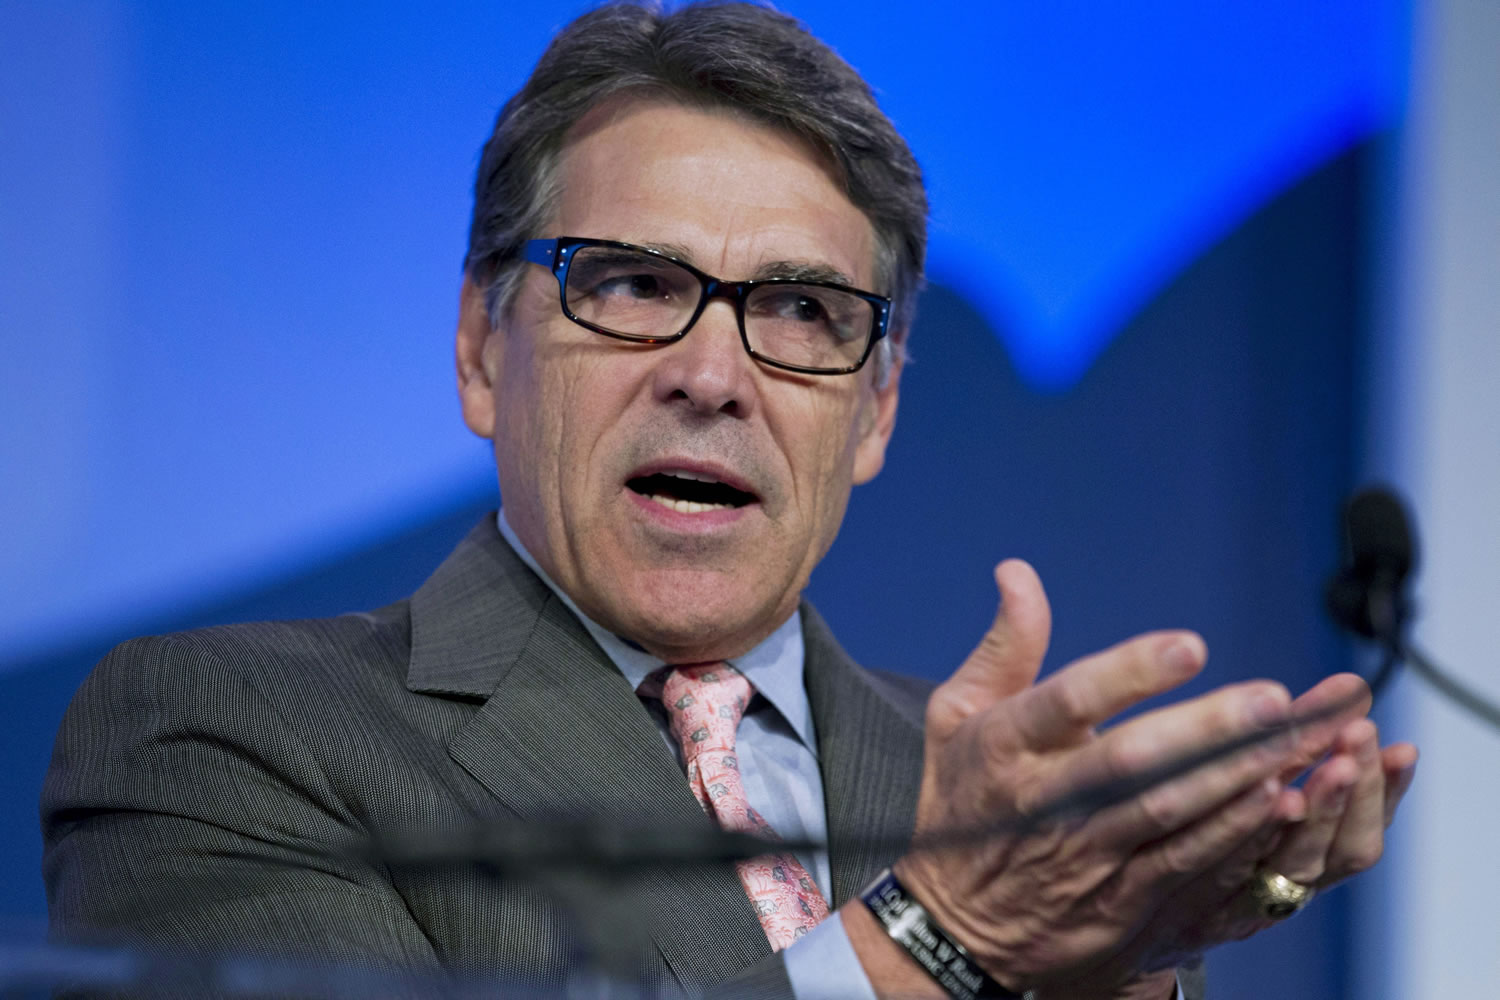 Former Texas Gov. Rick Perry speaks at an event in Washington. On Wednesday, Texas&#039; highest criminal court tossed the second and final felony charge against Perry, likely ending a case the Republican says helped sink his short-lived 2016 presidential bid.